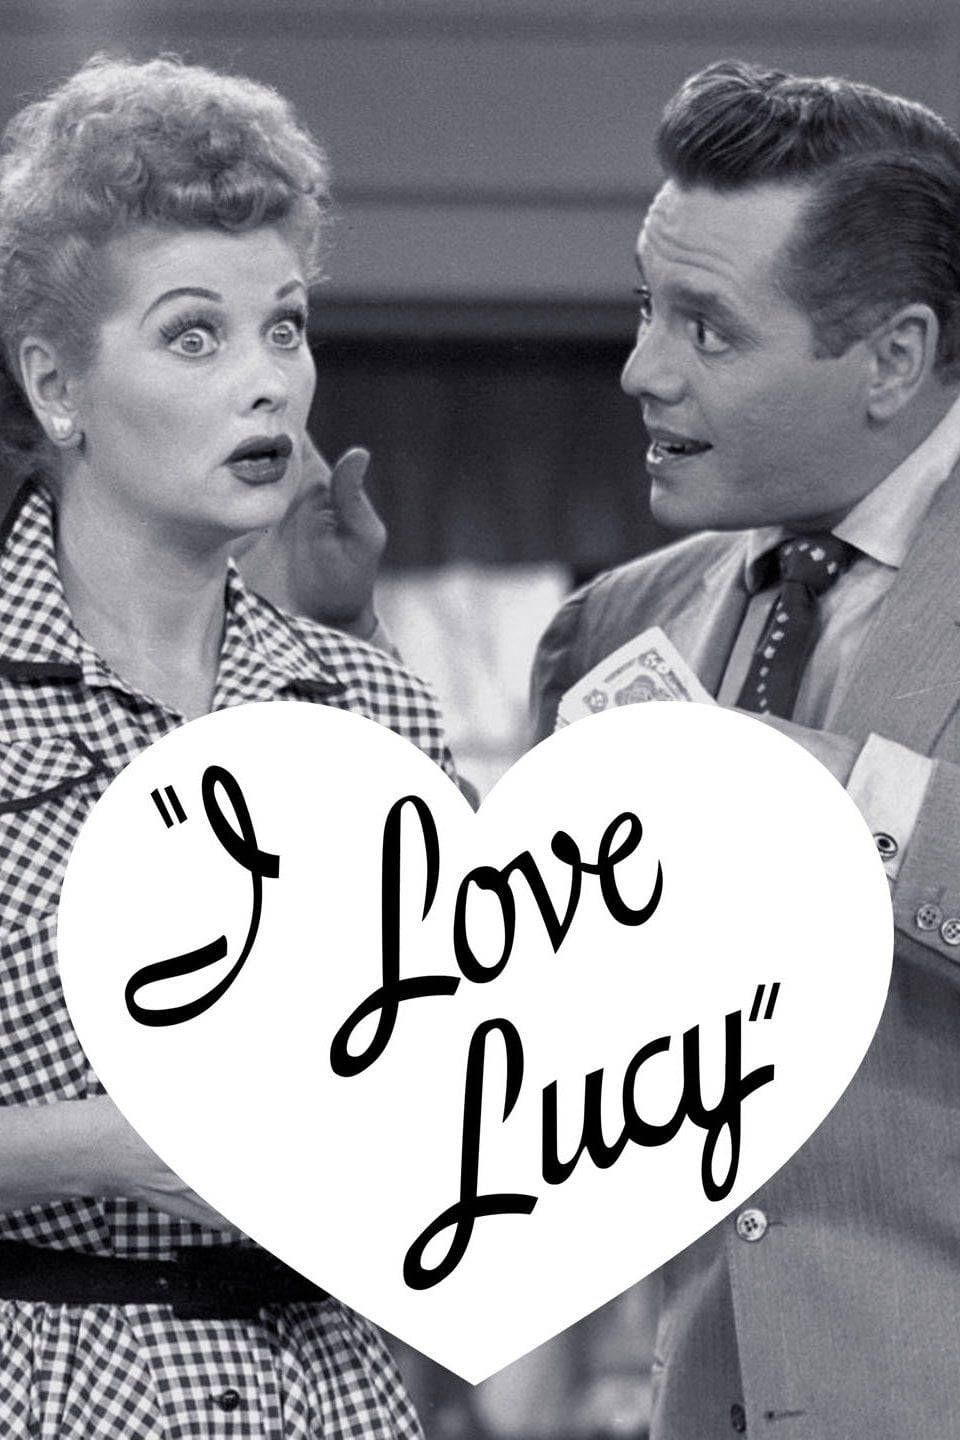 Lucille Ball And Desi Arnaz - The Icons Of 'i Love Lucy' Background